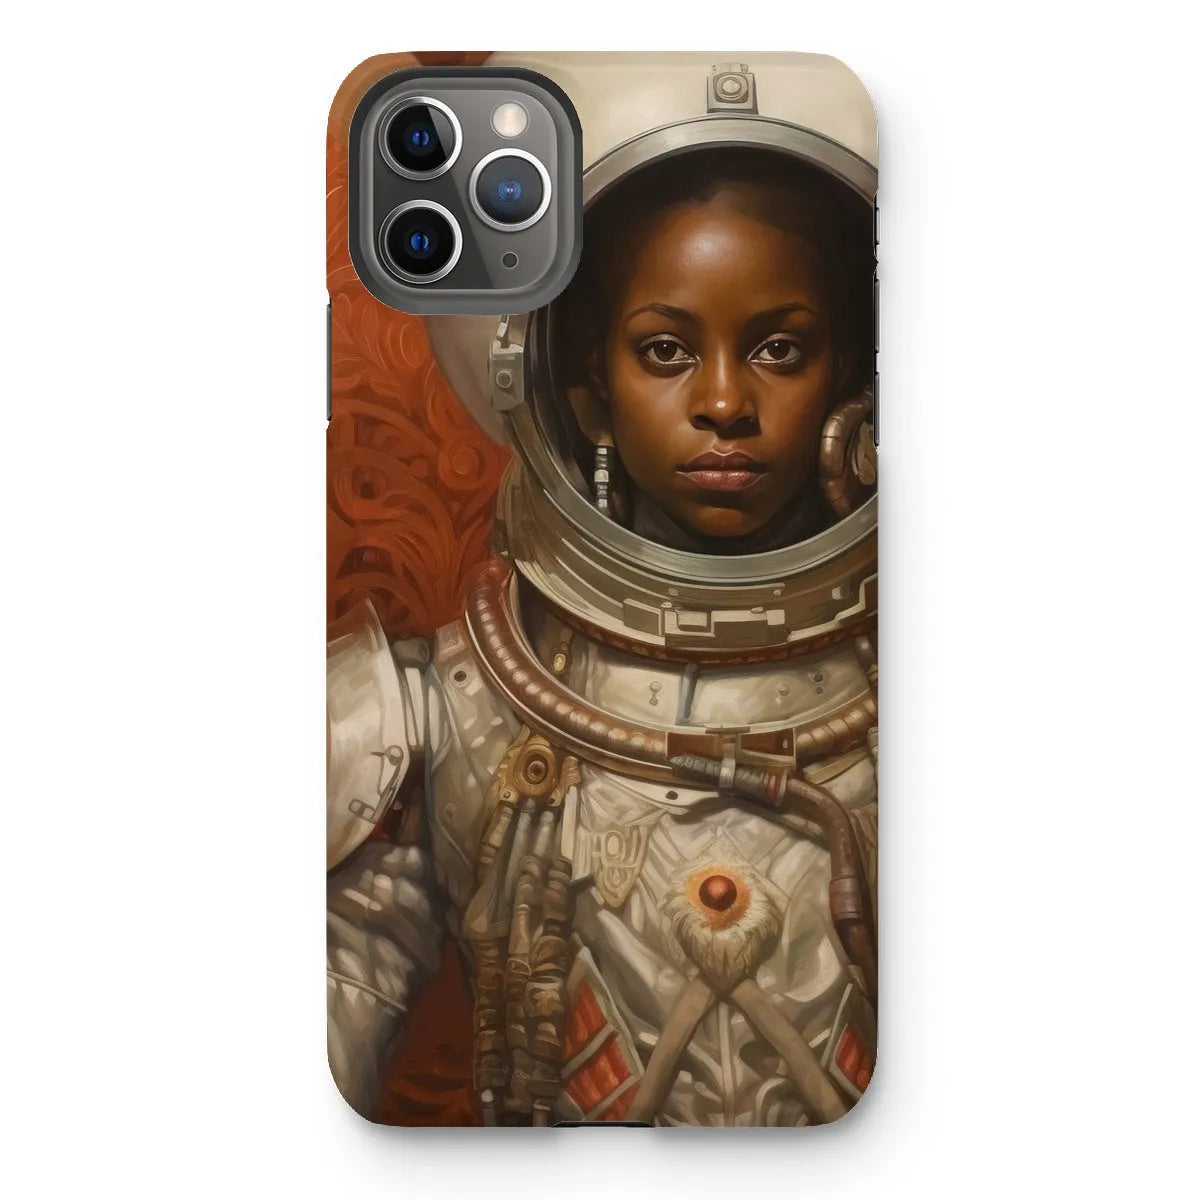 Ava The Lesbian Astronaut - Sapphic Aesthetic Phone Case - Iphone 11 Pro Max / Matte - Mobile Phone Cases - Aesthetic